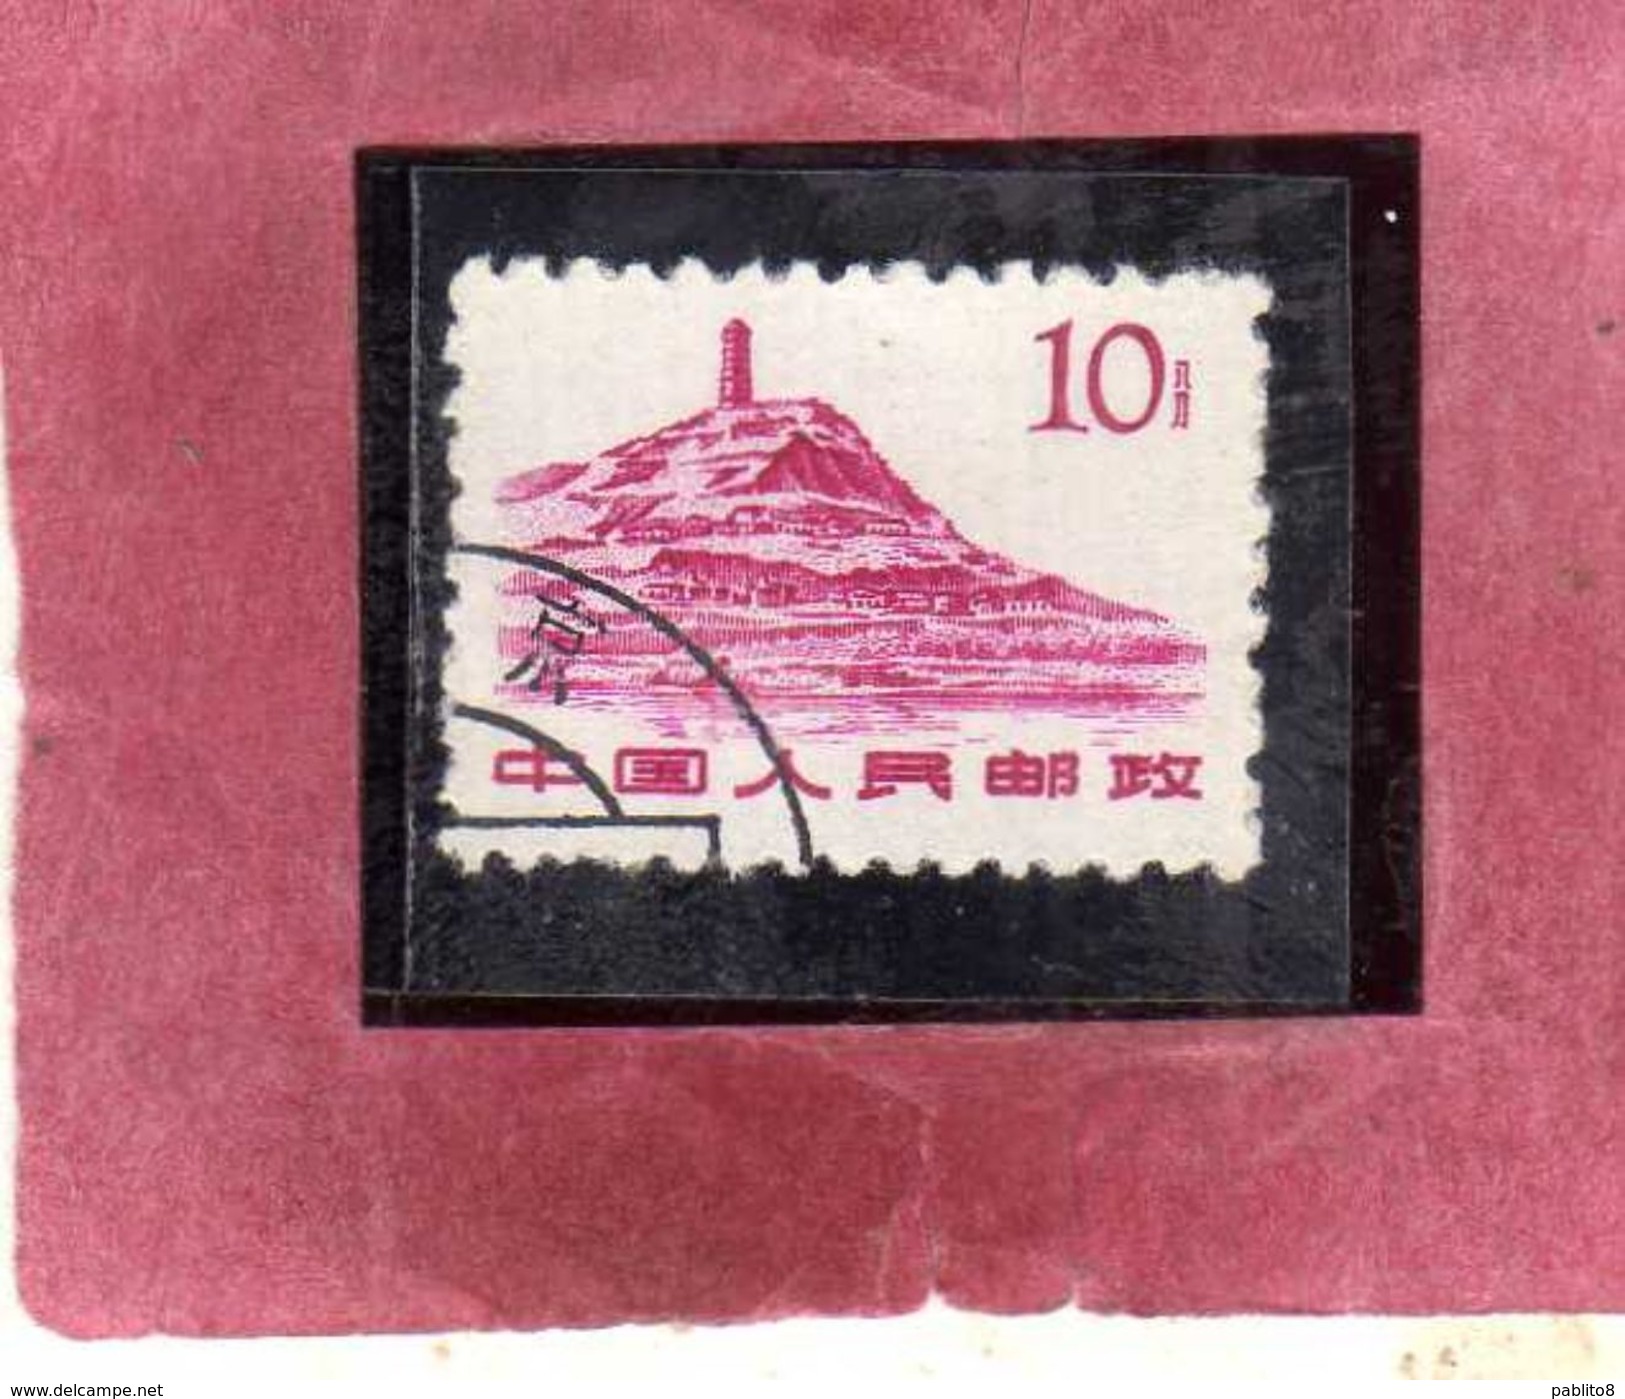 CHINA CINA 1961 BUILDINGS PAGODA HILL YENAN 10f USATO USED OBLITERE' - Gebraucht